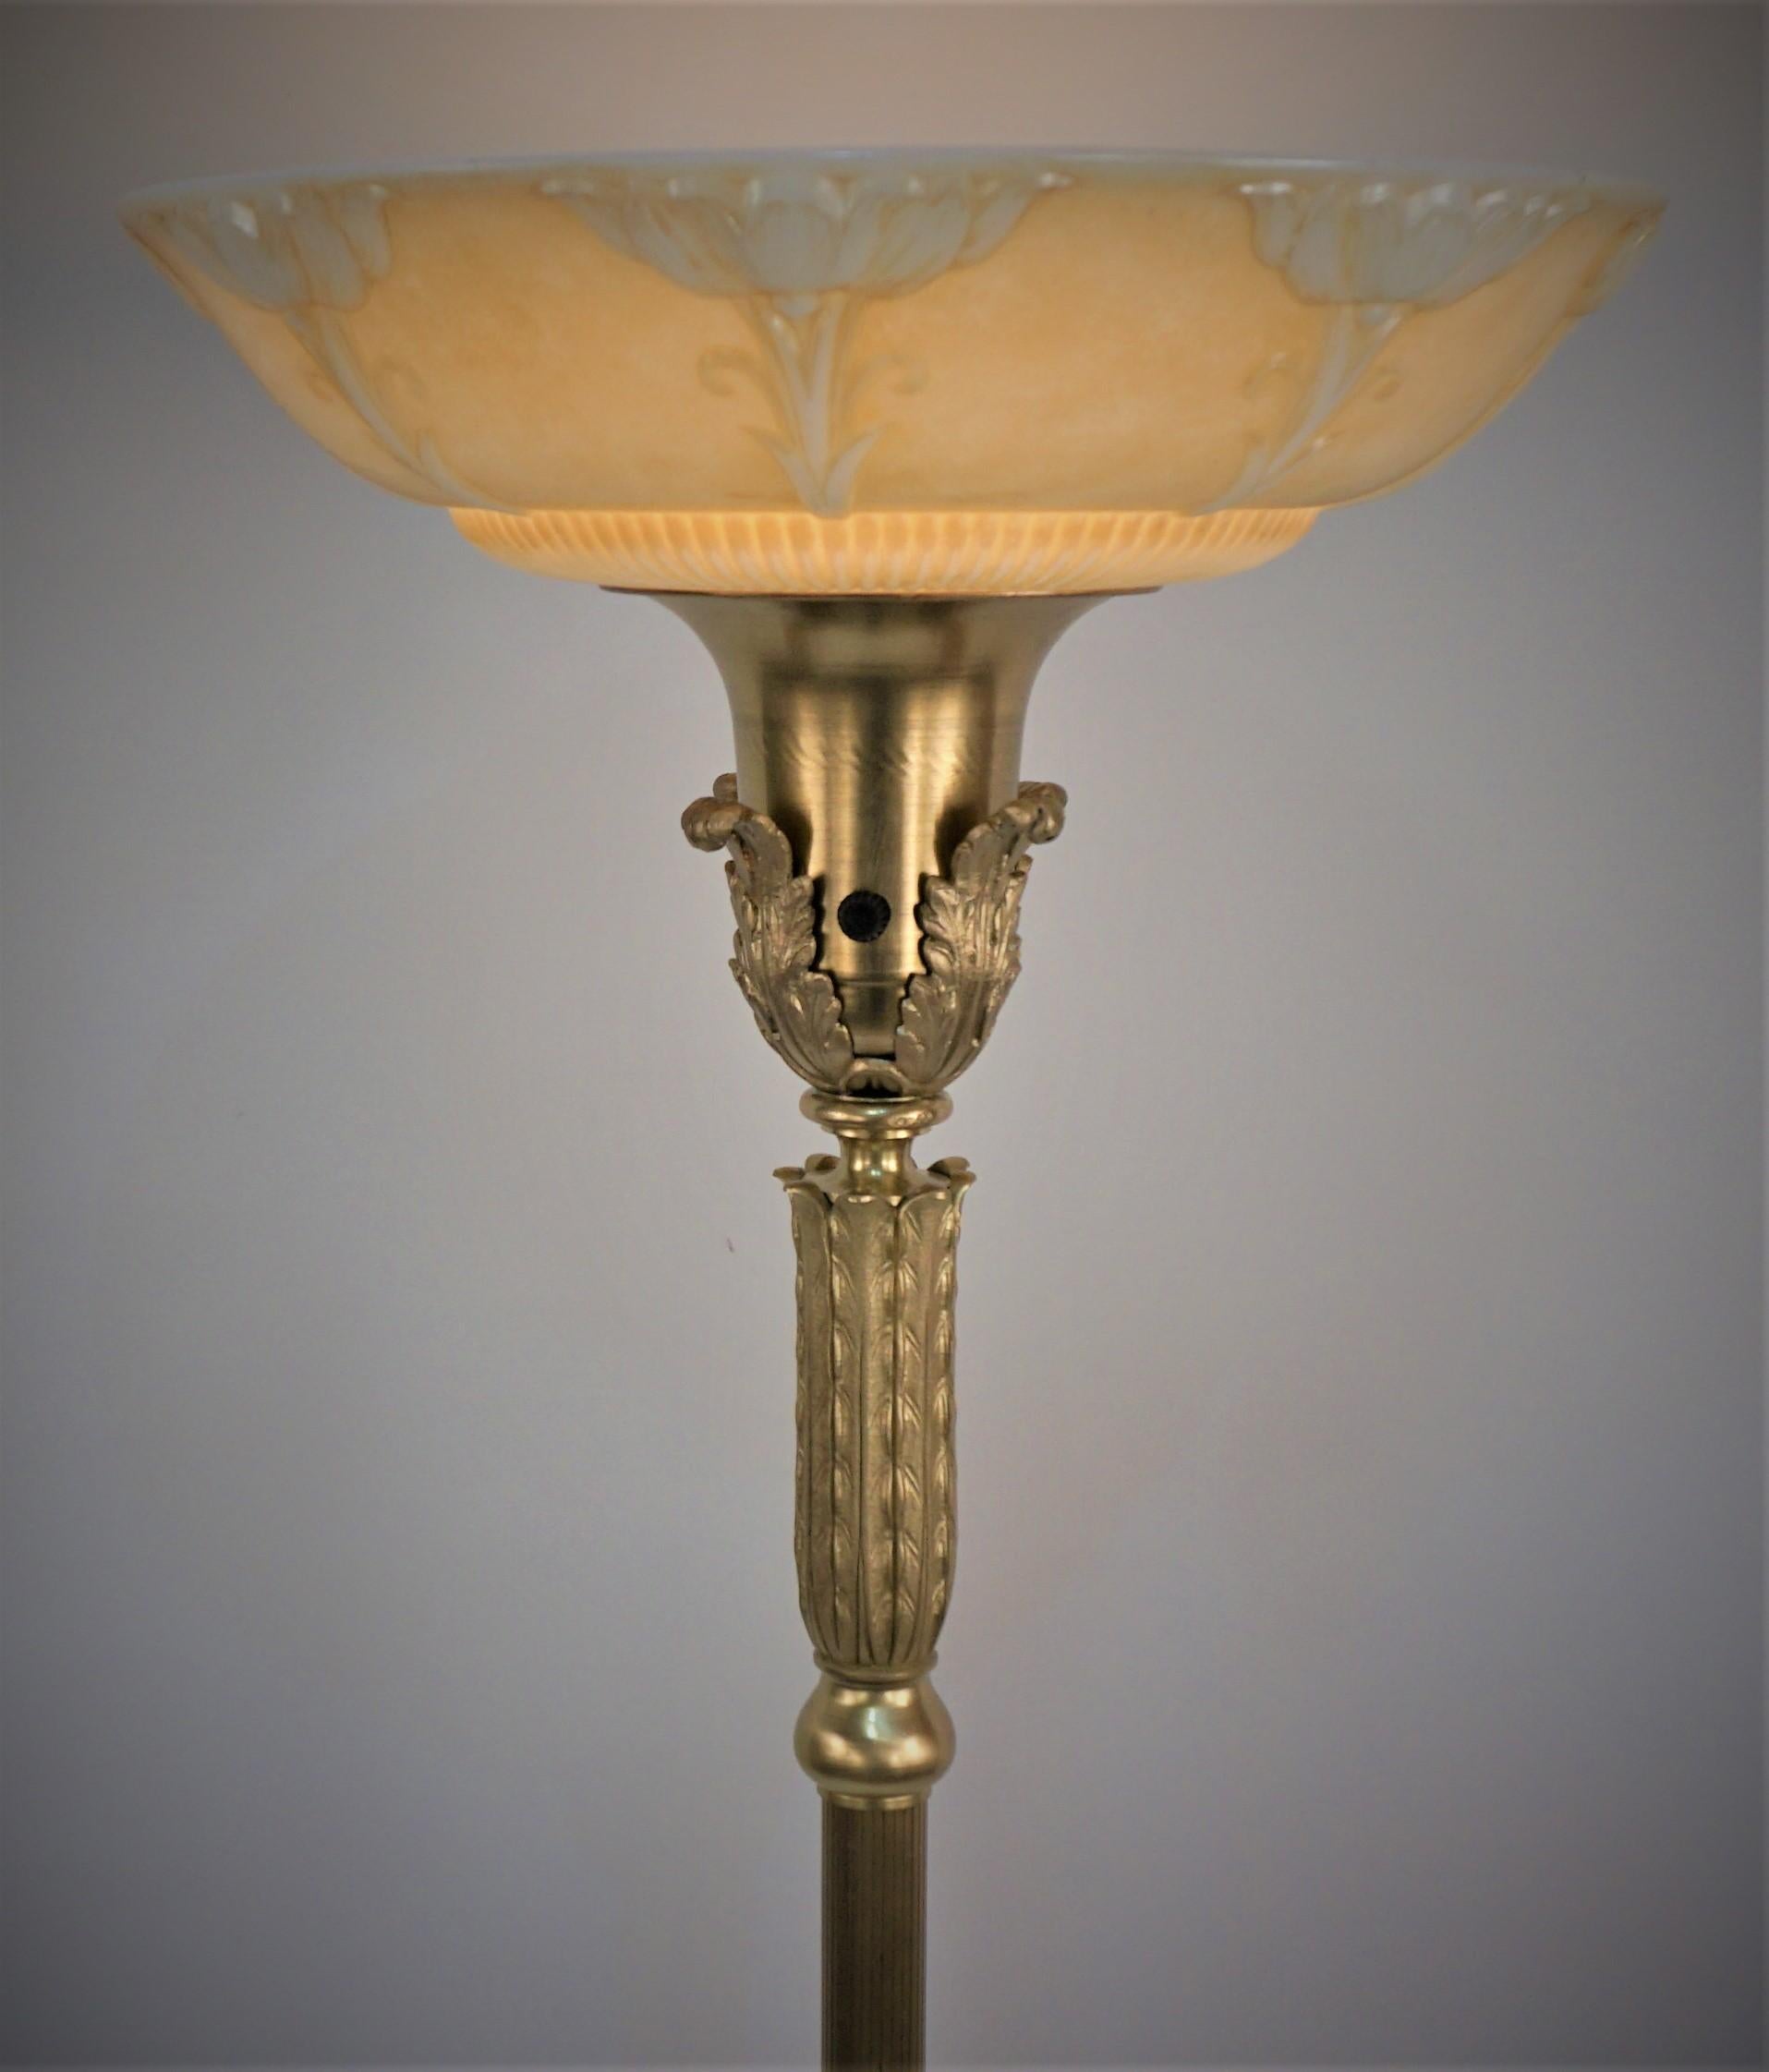 Elegant high quality 1920' torchiere floor lamp.
Majority of early American torchiere were brass plated but is build floor mostly from heavy cased brass.
Light three way 100-300 watts, light bulb included.